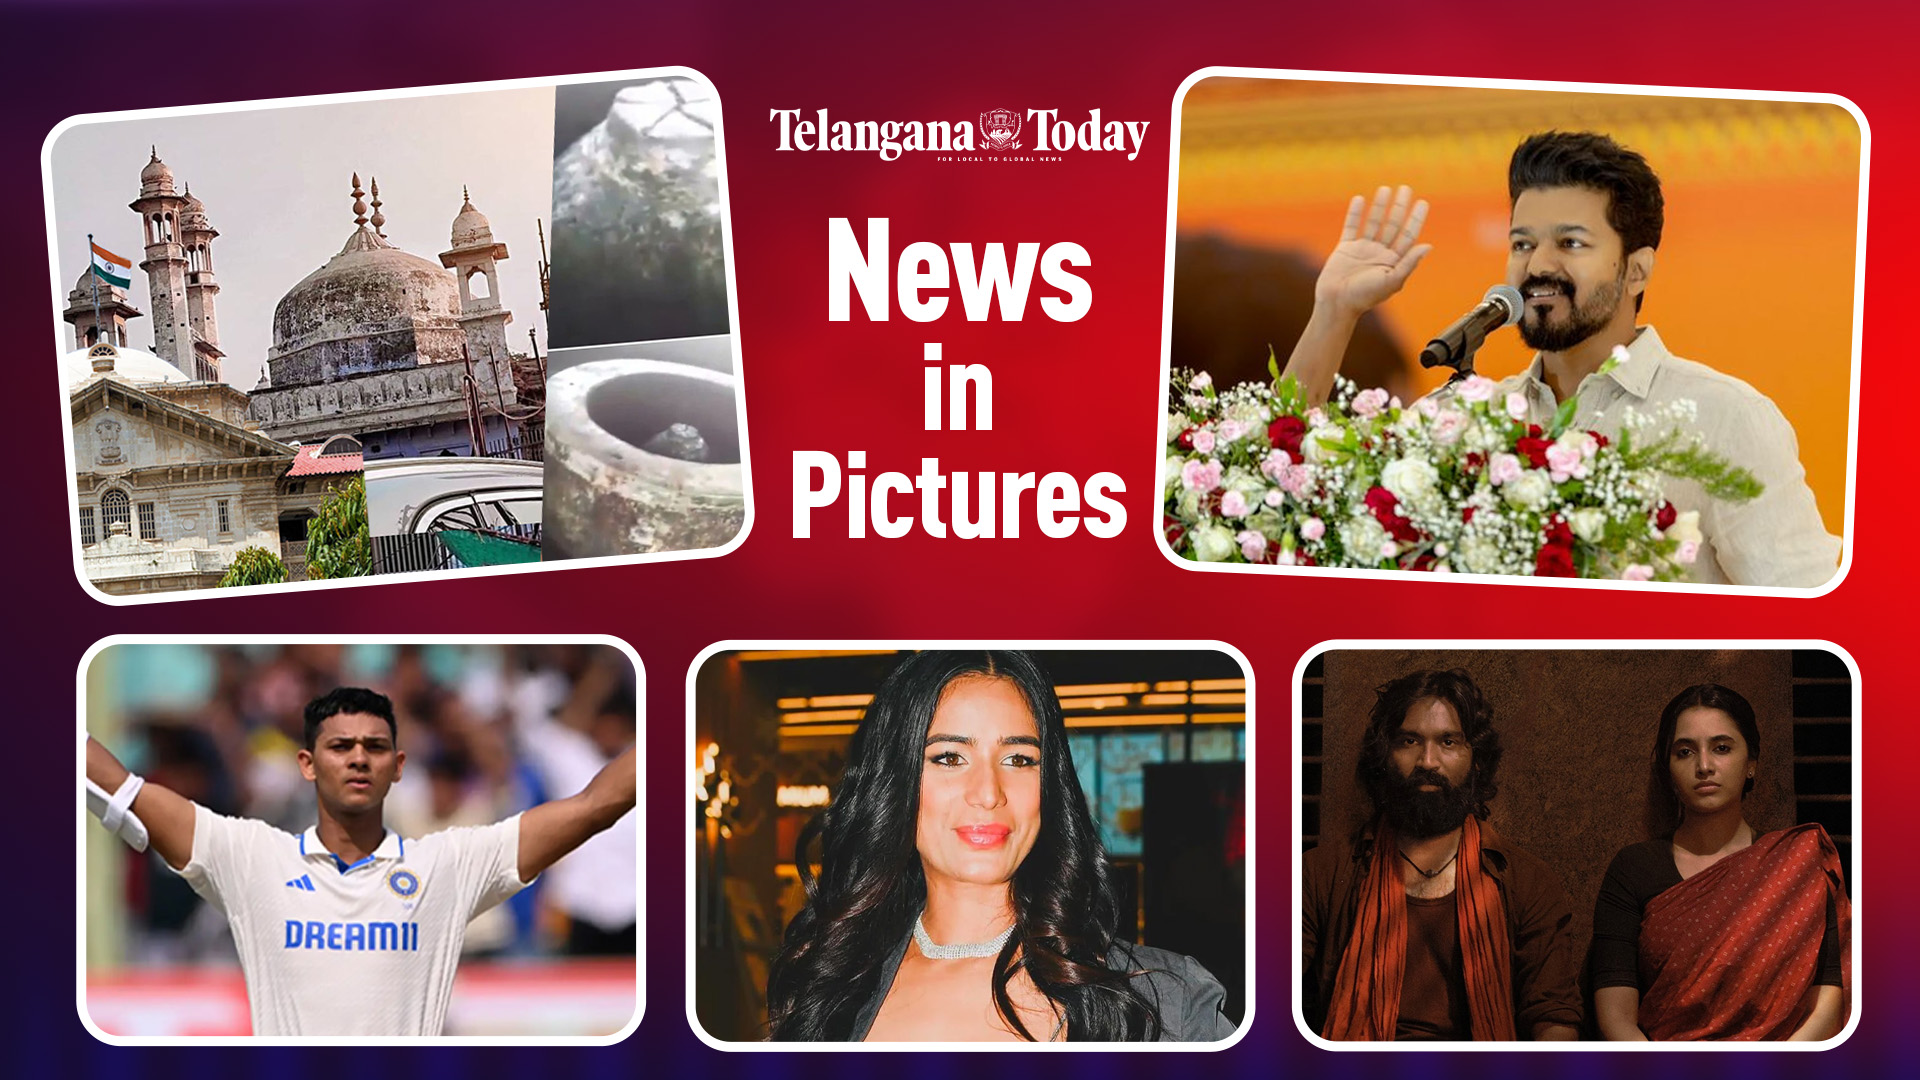 News in Pictures: Hindu Puja in Gyanvapi Mosque, Thalapathy Vijay into Politics, Yashasvi Jaiswal Century, and more